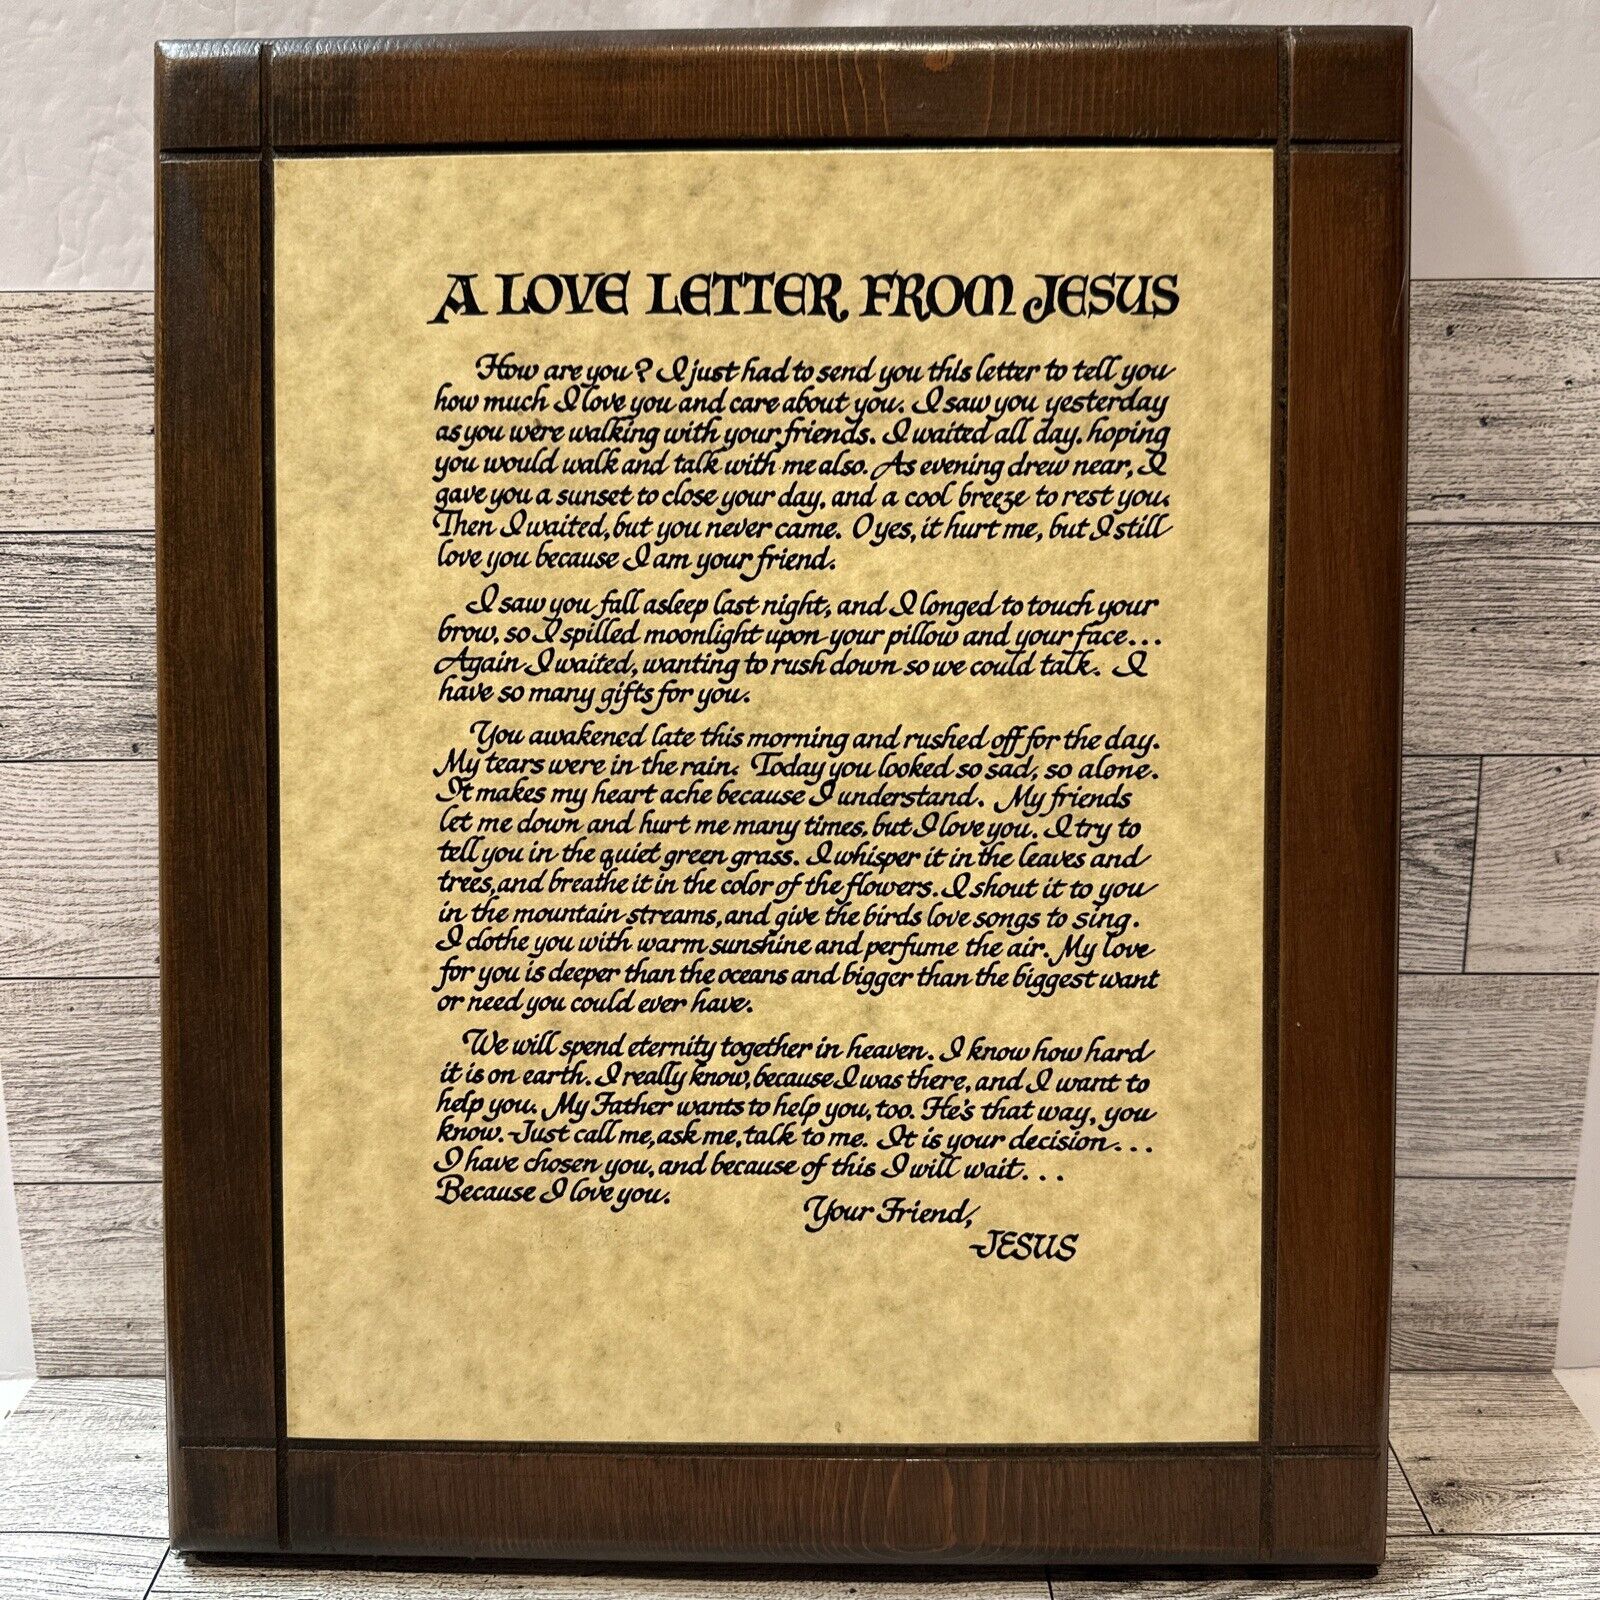 A Love Letter from Jesus Wood Wall Plaque 13.5x11” Religious Vintage